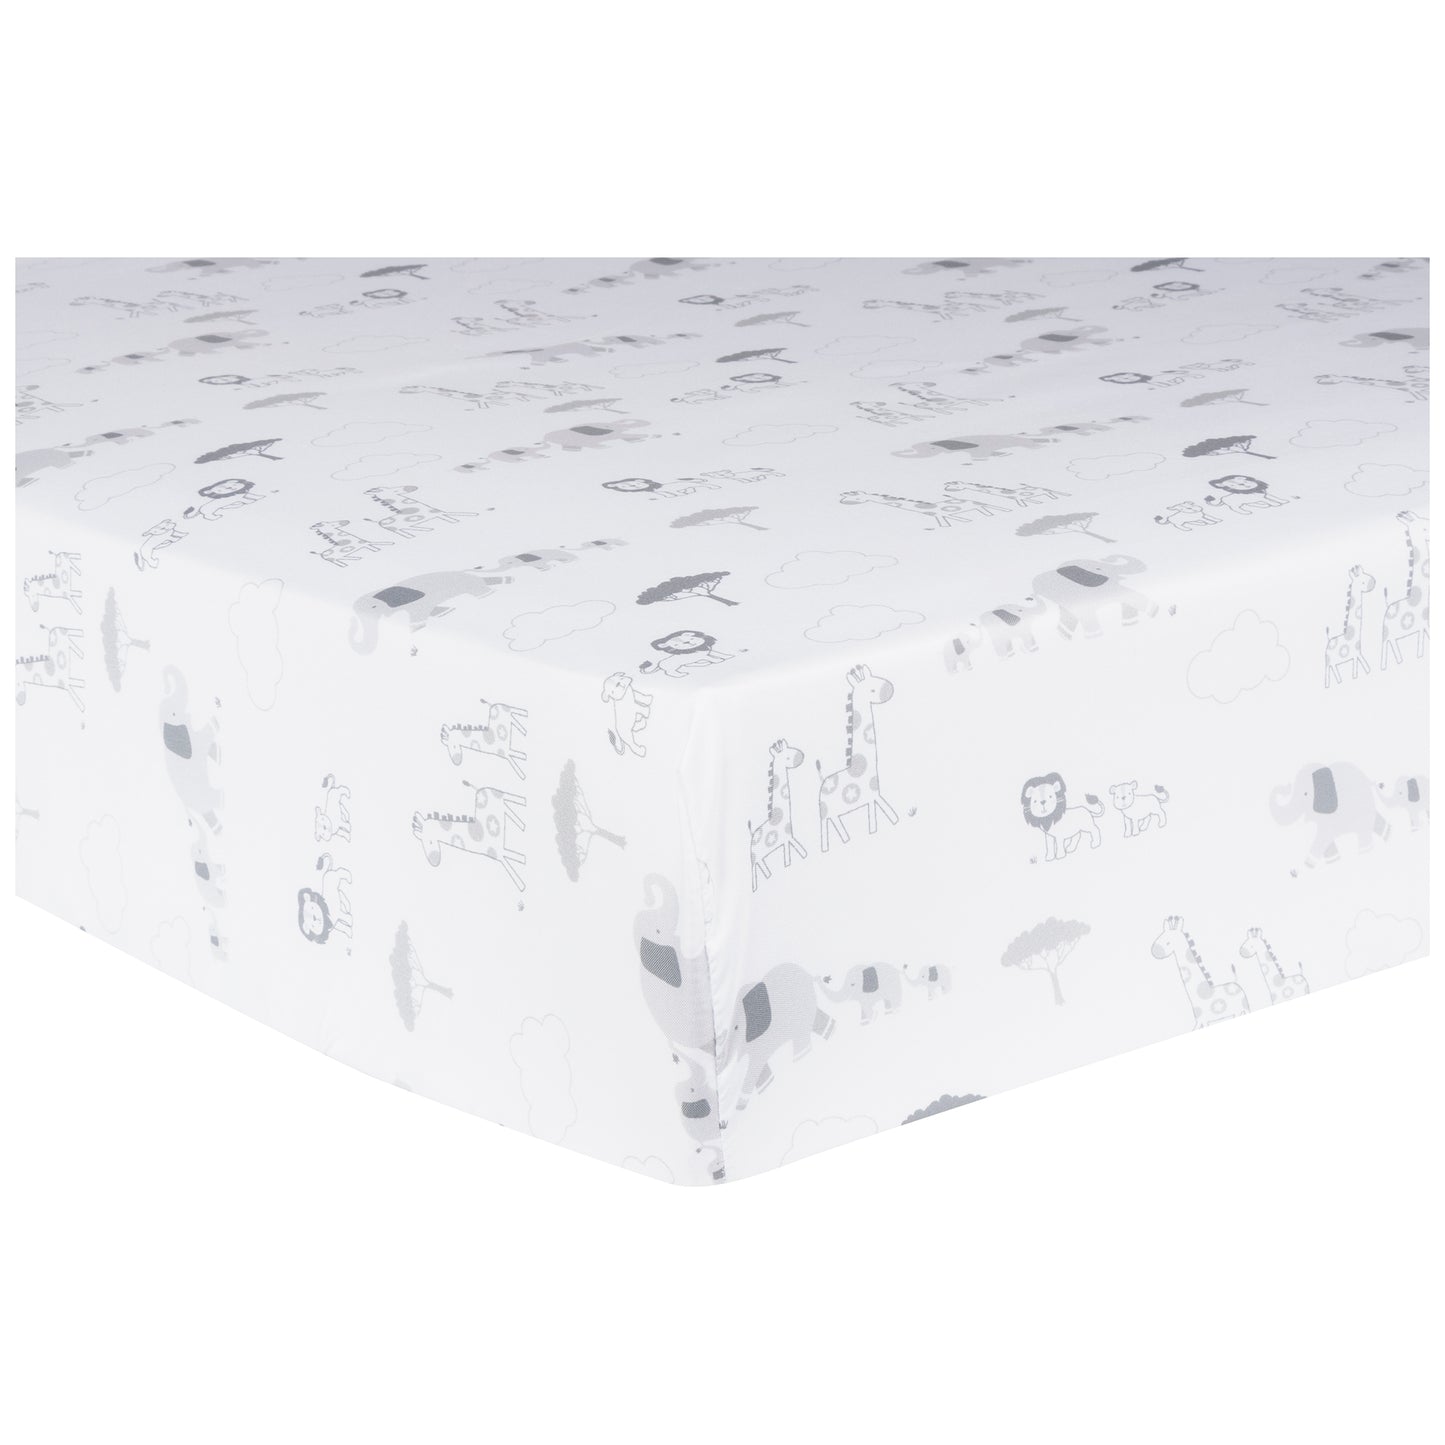 Fitted crib sheet fits standard crib mattress 28 in x 52 in with 8-inch-deep pockets and is fully elasticized for a secure fit.